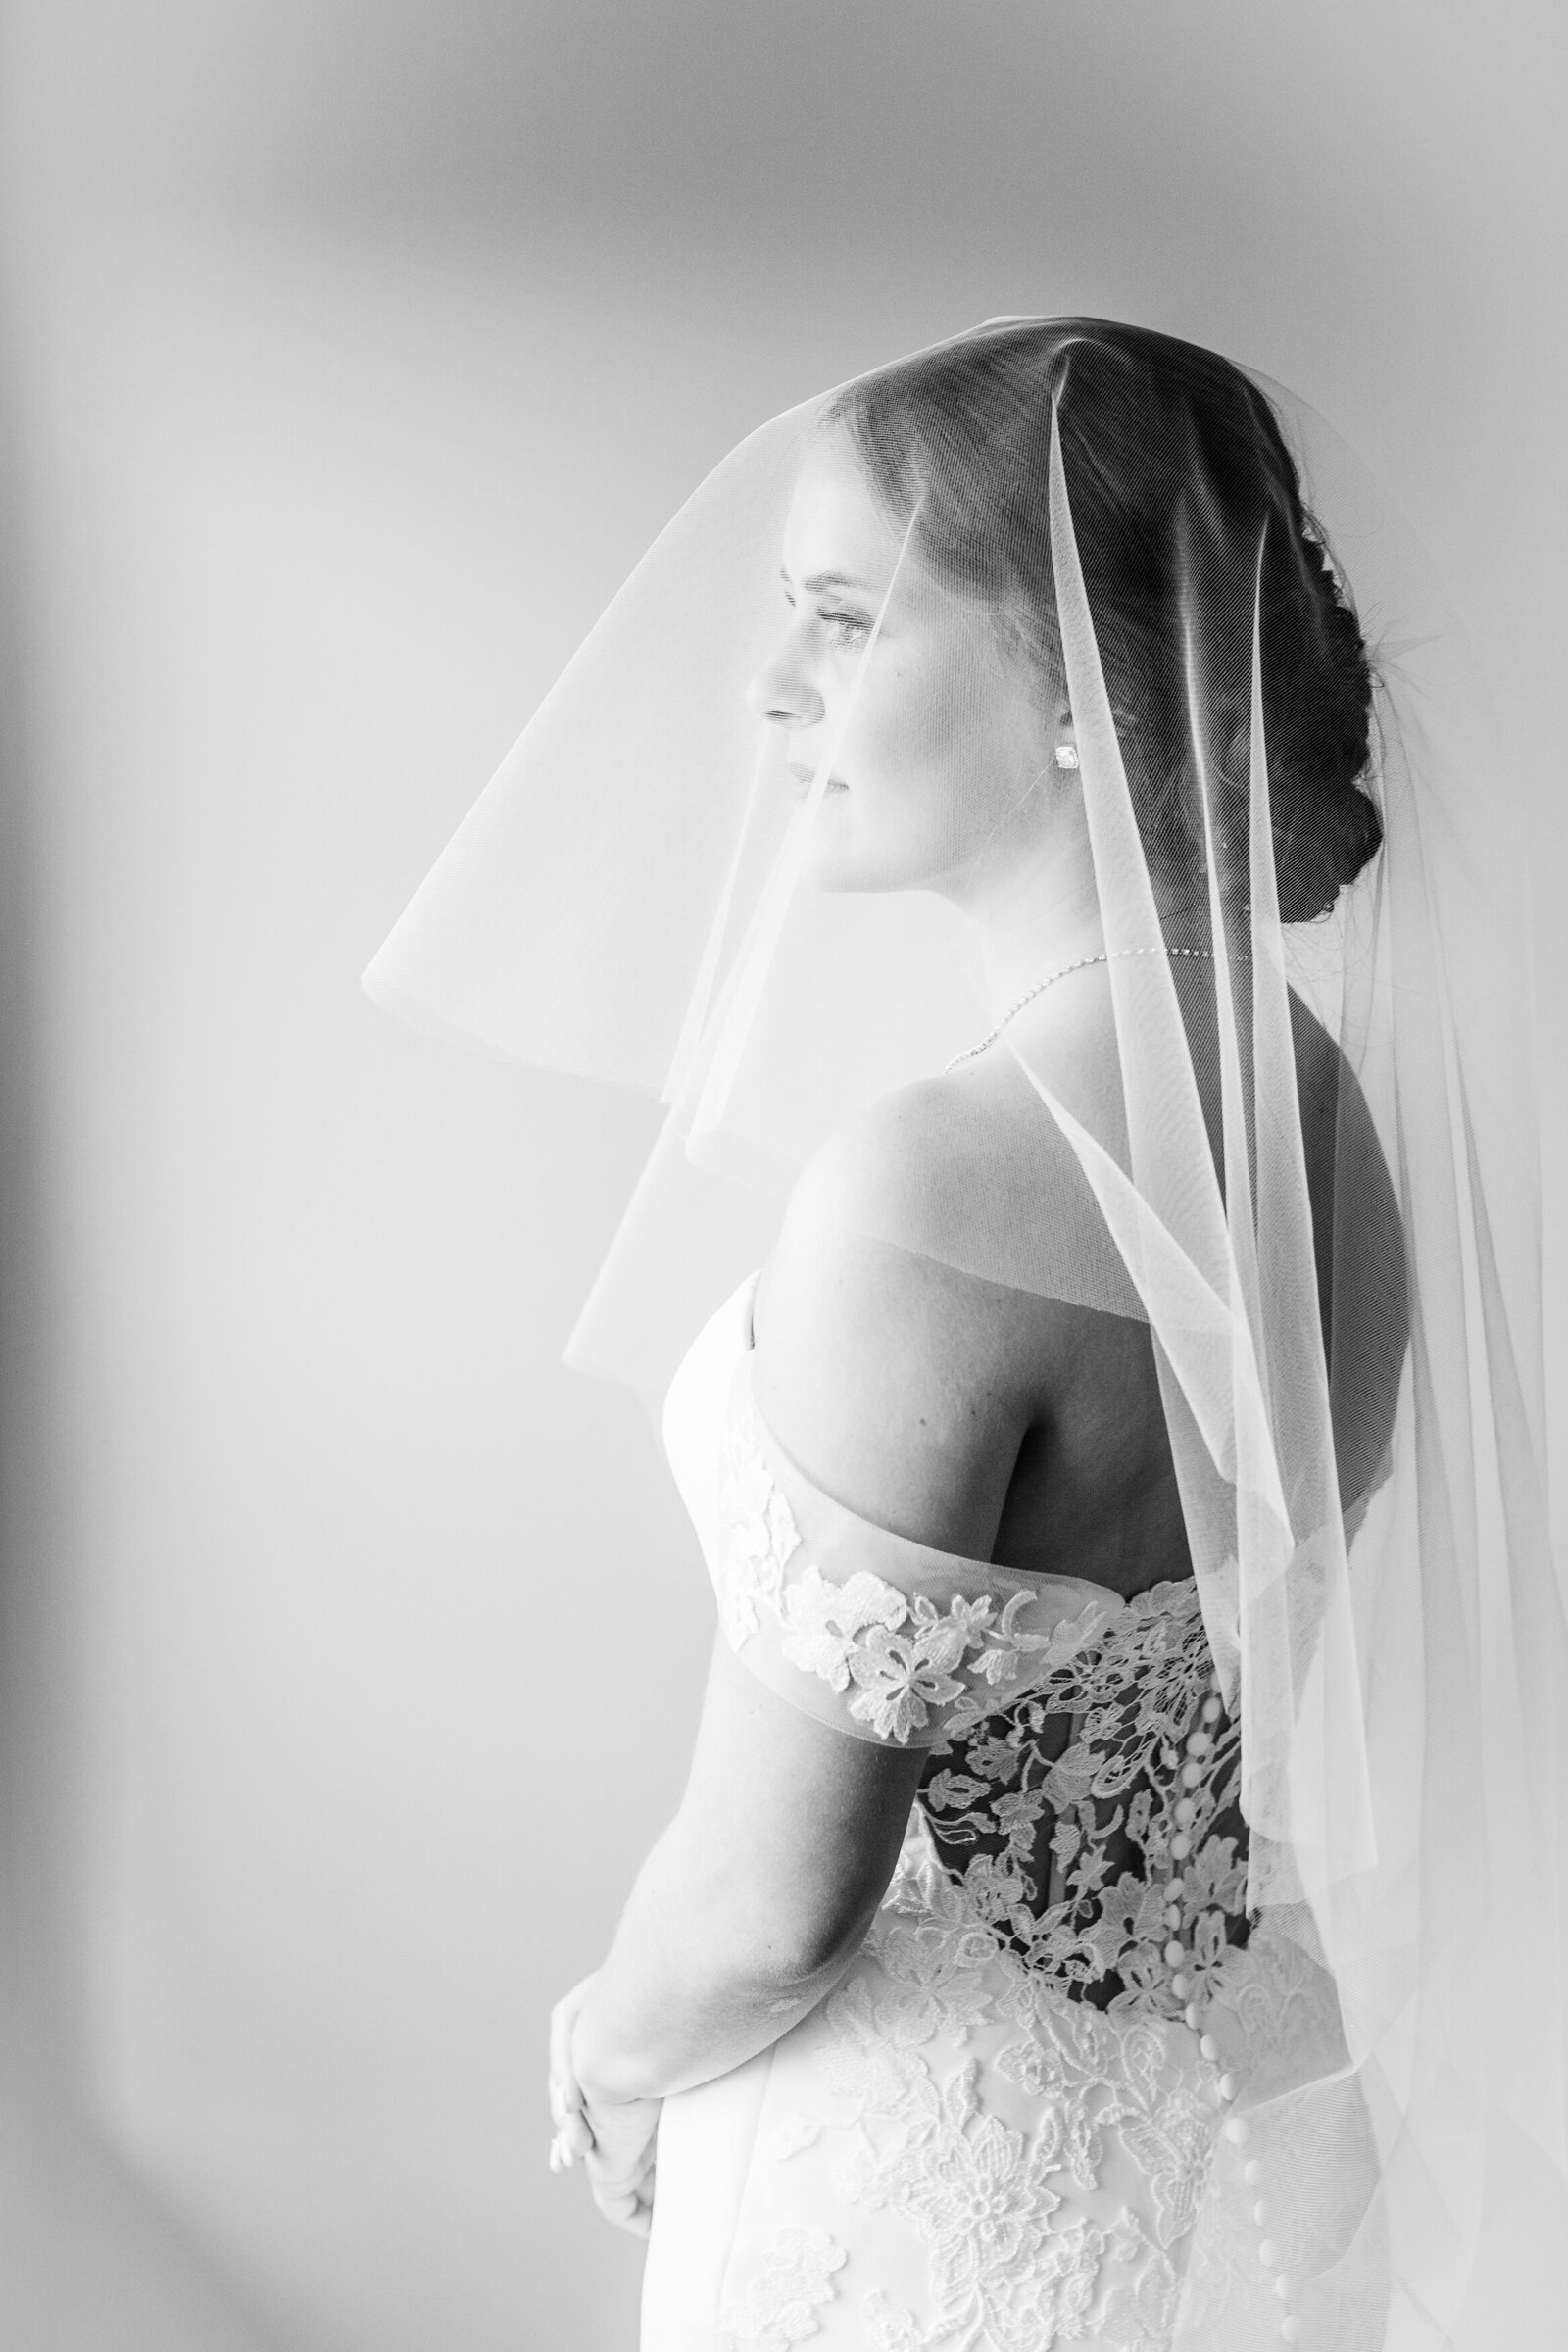 Bride-looking-out-window-under-her-wedding-veil-after-getting-ready